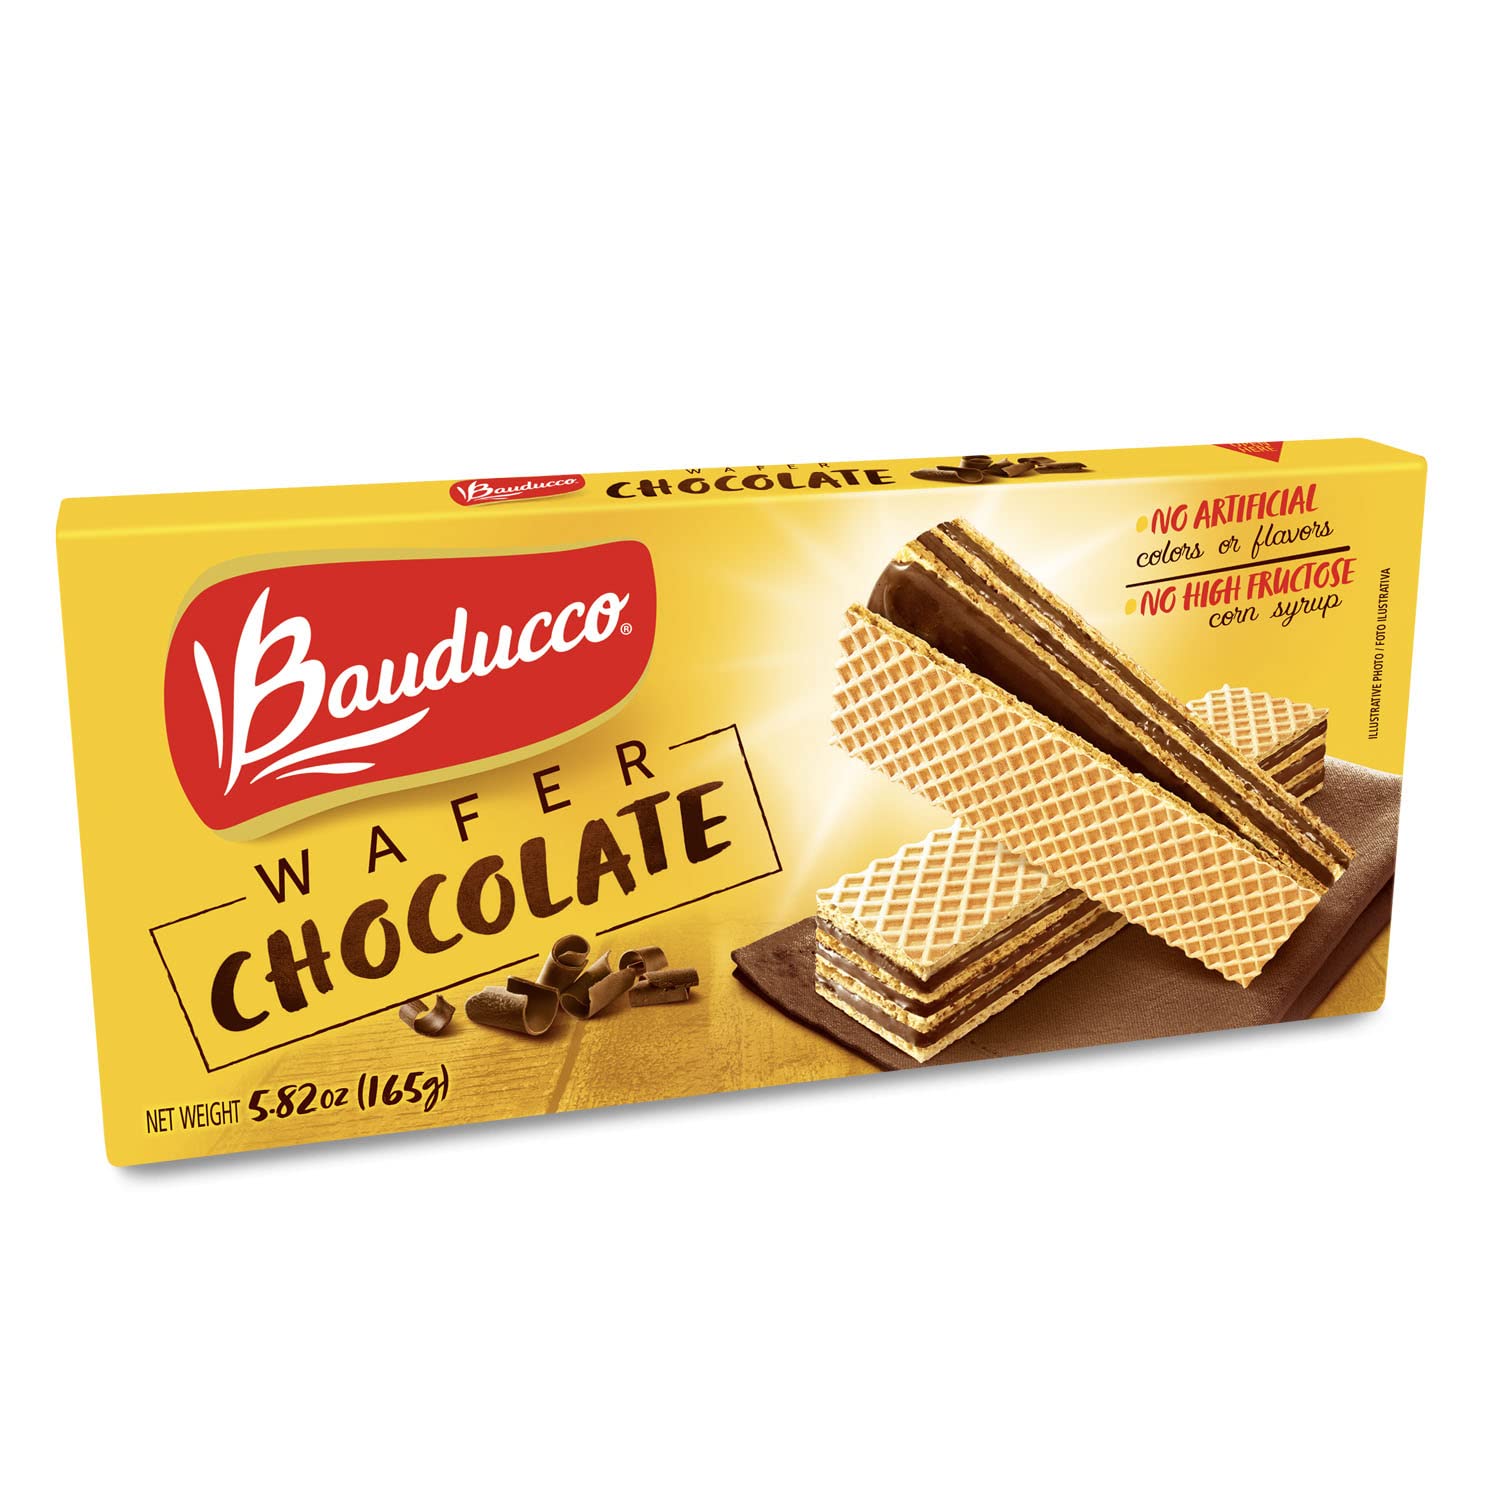 5.82-Oz​ Bauducco Chocolate Cream Wafers $0.99 + Free Shipping w/ Prime or on orders over $35